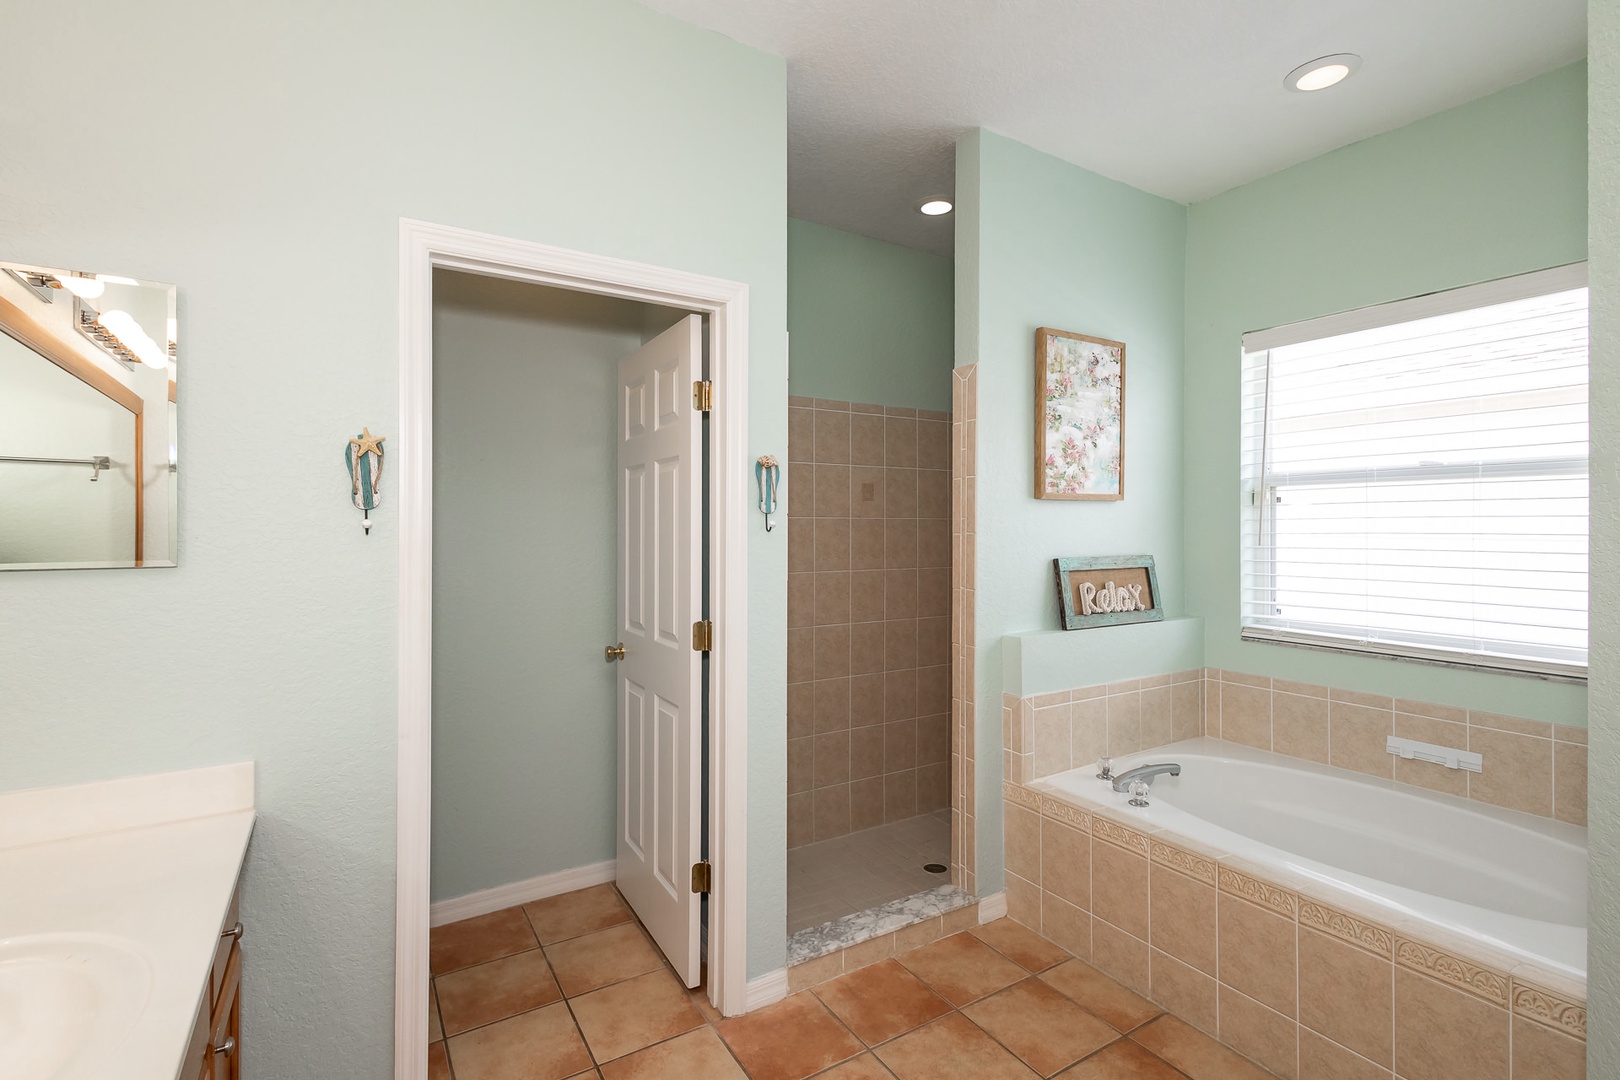 Bathroom #1 with shower and tub attached to bedroom #1